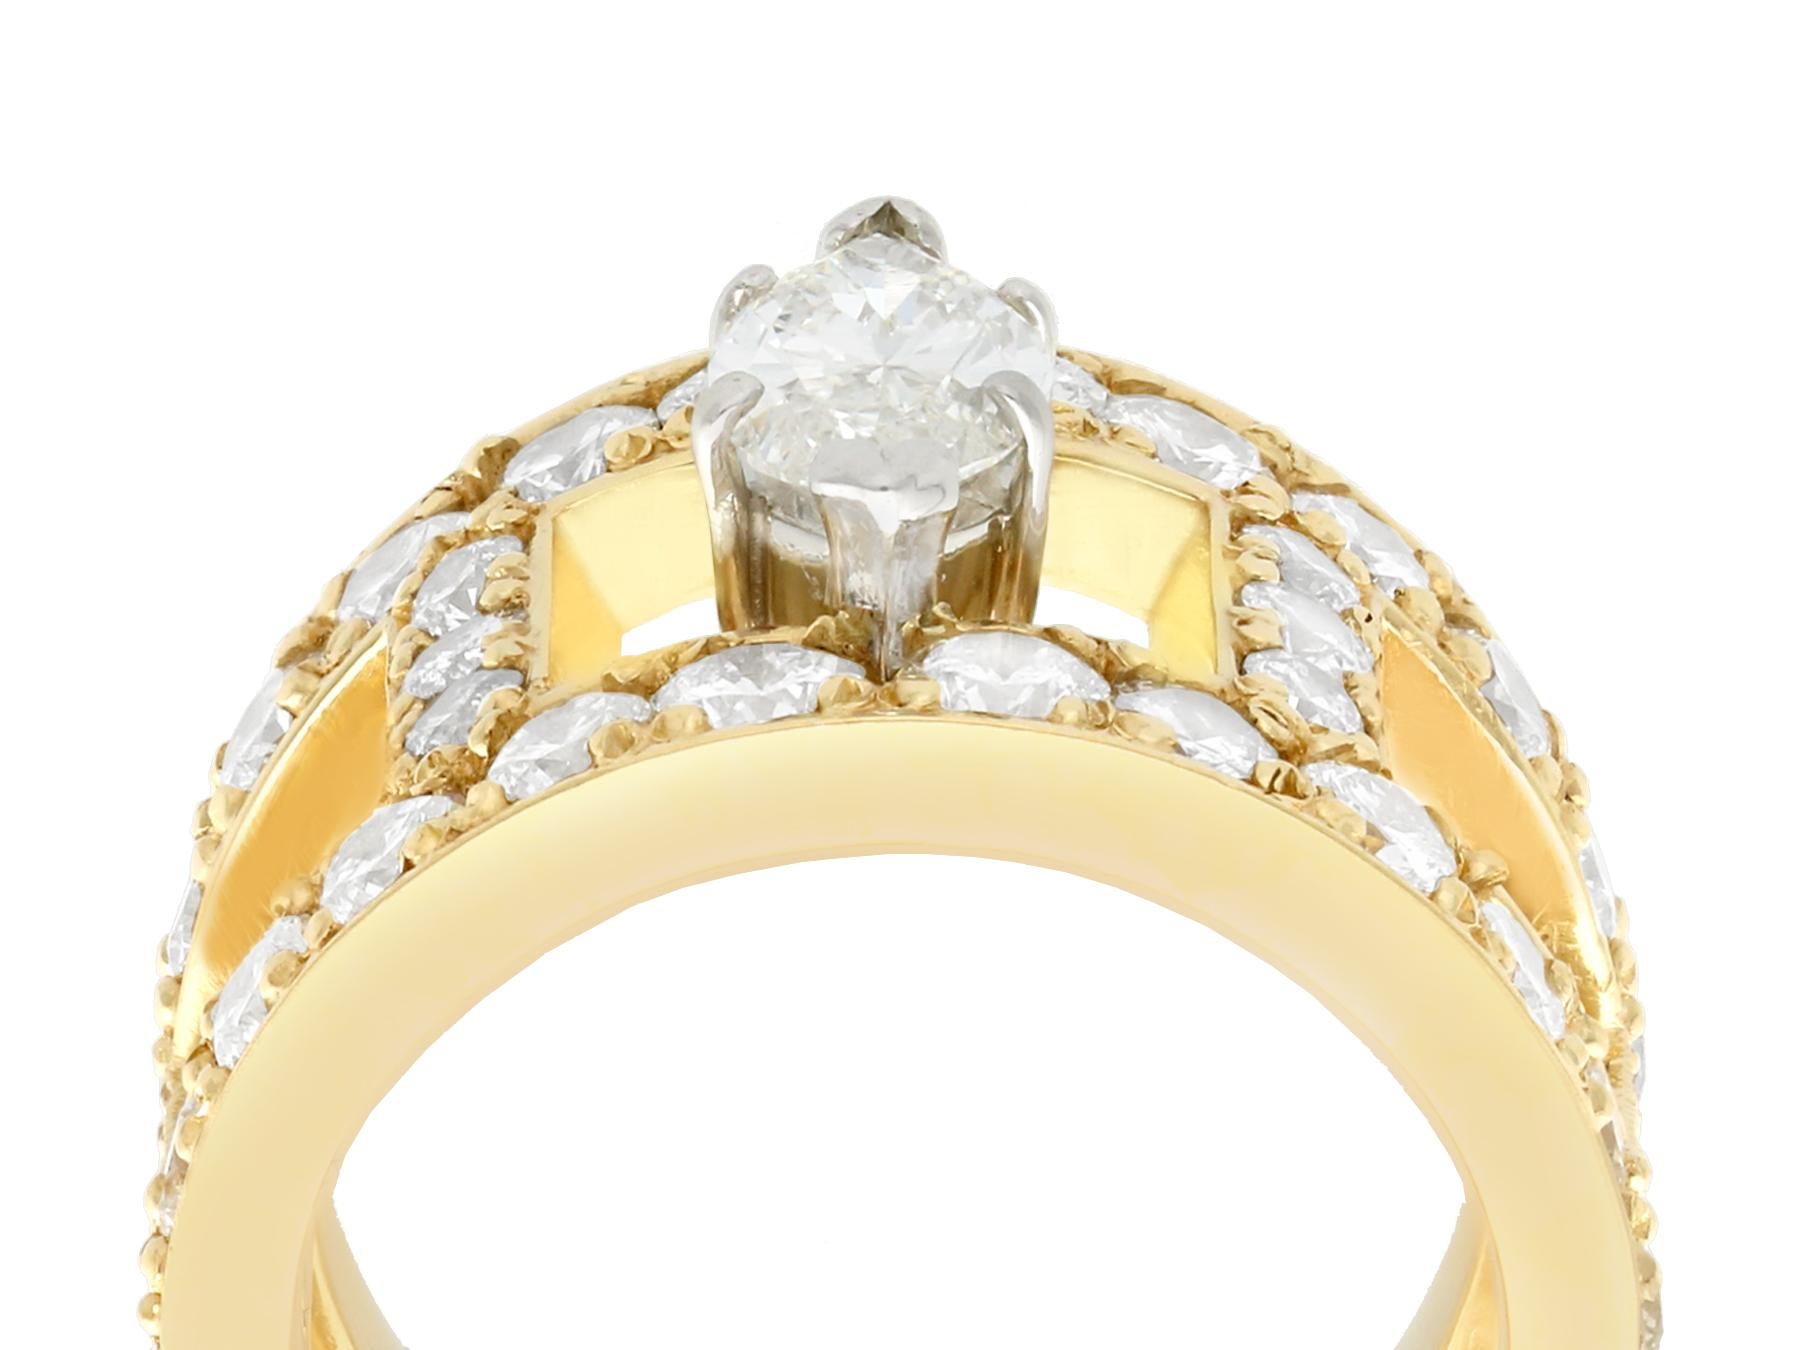 A stunning vintage 1990s 3.93 carat diamond and 18 karat yellow gold cocktail ring; part of our diverse diamond jewelry and estate jewelry collections.

This stunning, fine and impressive vintage diamond ring has been crafted in 18k yellow gold with